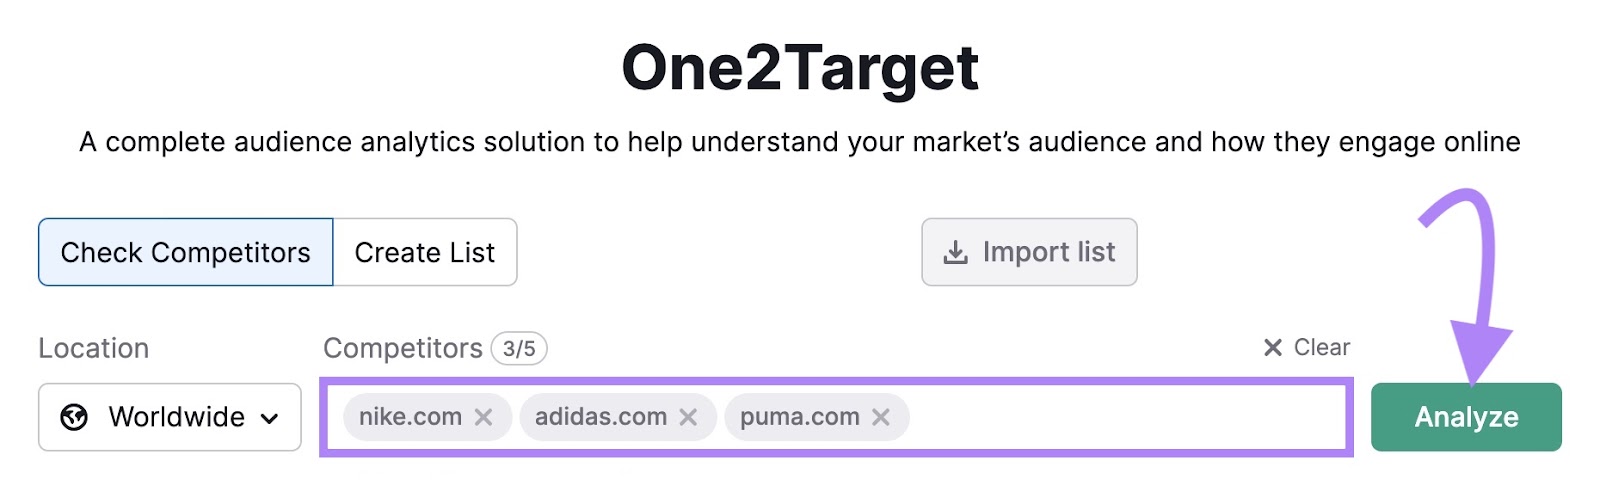 One2Target tool interface with “nike.com,” “adidas.com,” and “puma.com” entered in the domain bar.